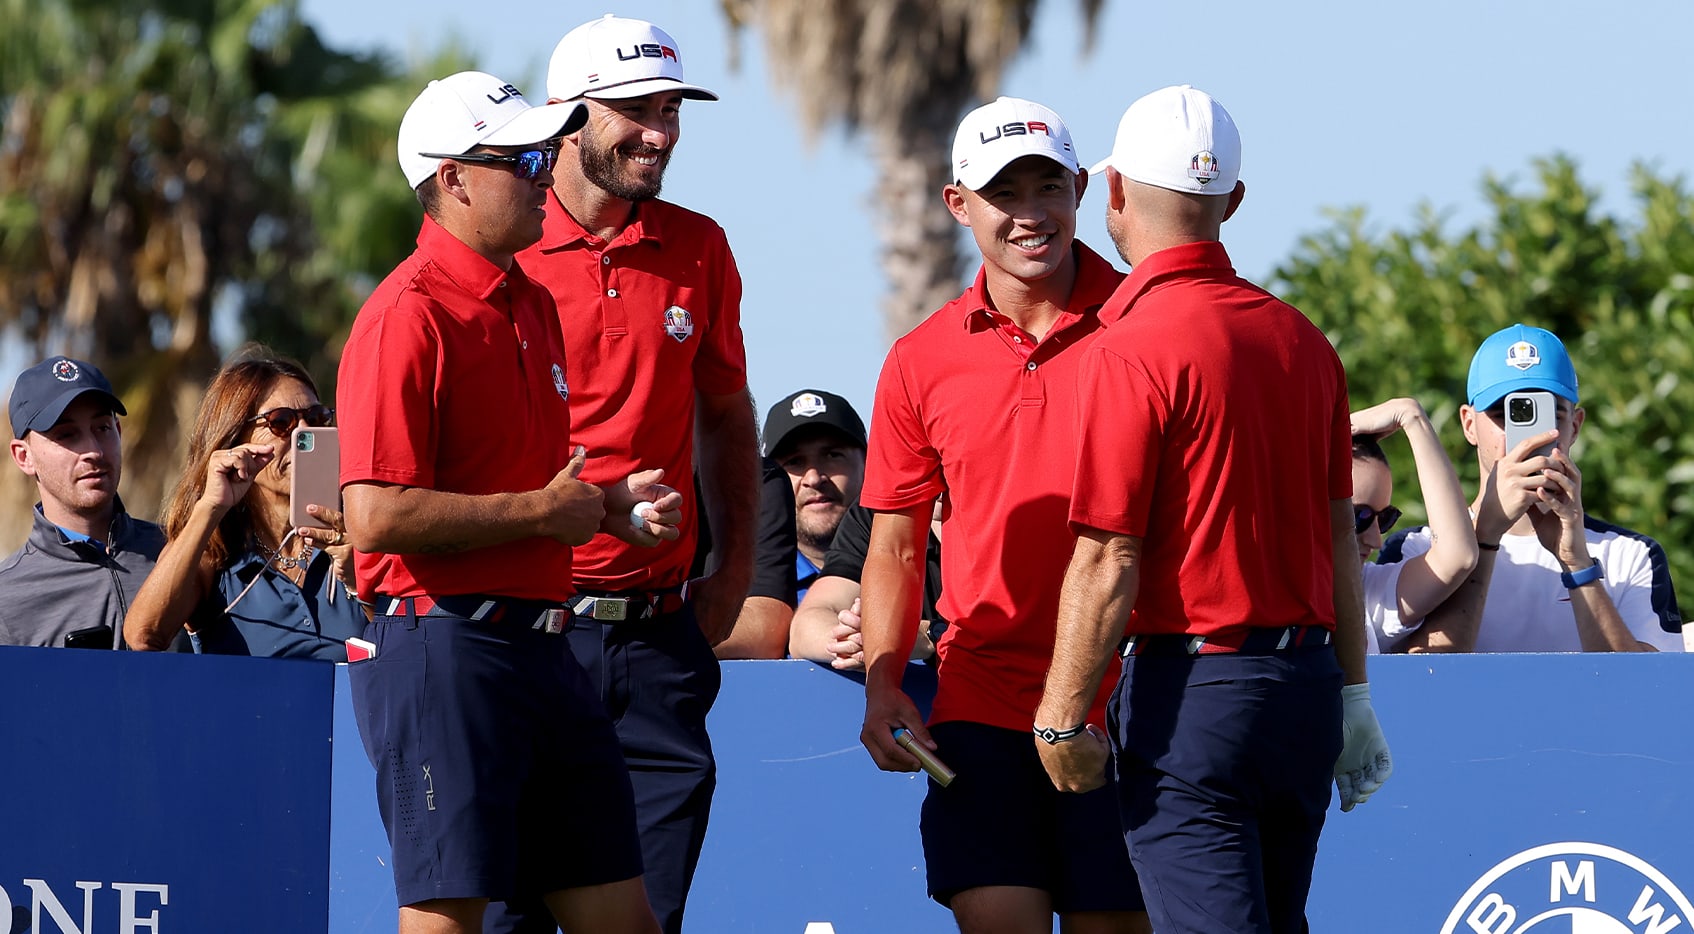 Power Rankings See how every player in the Ryder Cup stacks up PGA TOUR